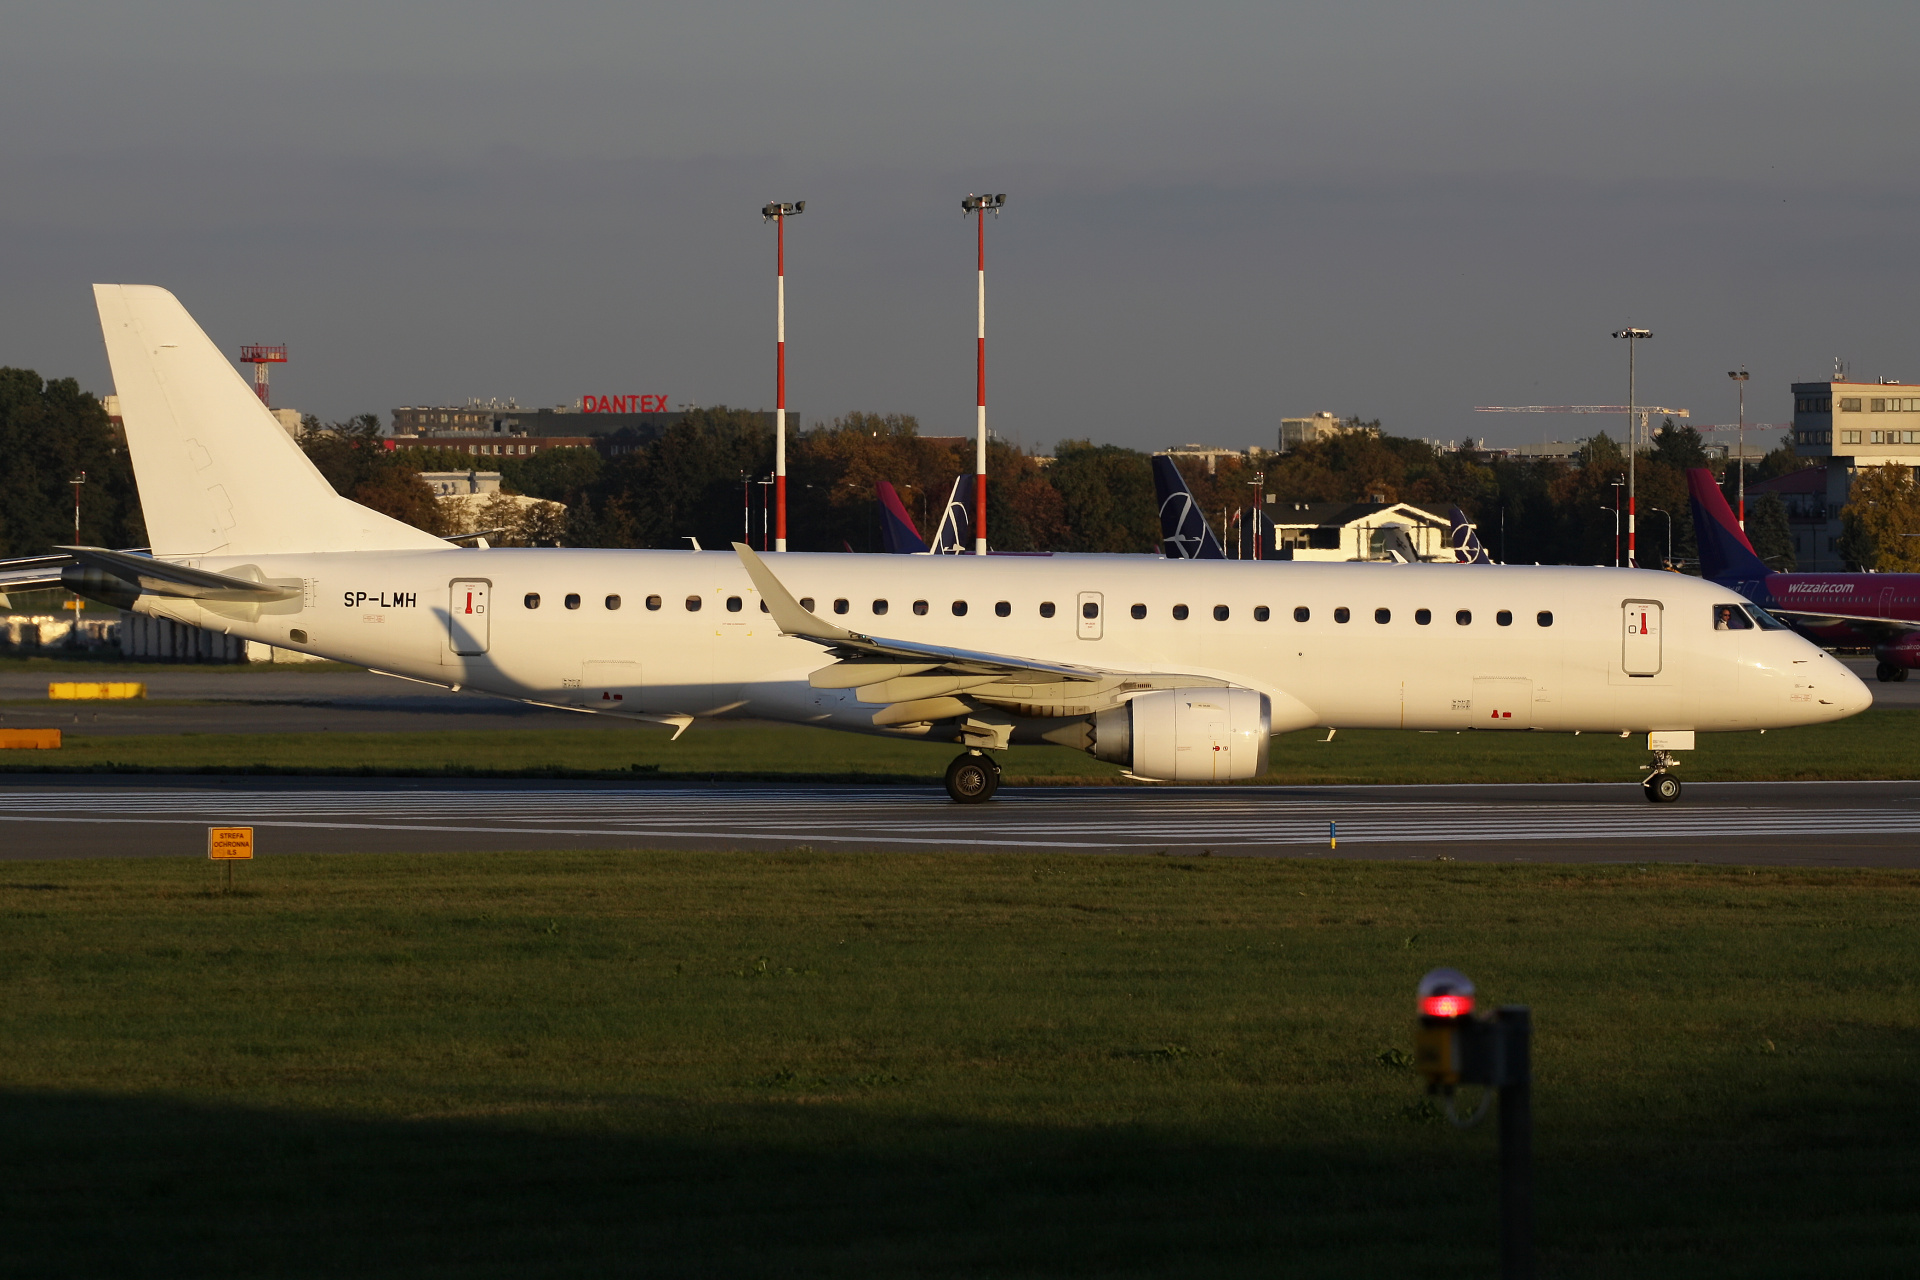 SP-LMH (no livery) (Aircraft » EPWA Spotting » Embraer E190 » LOT Polish Airlines)